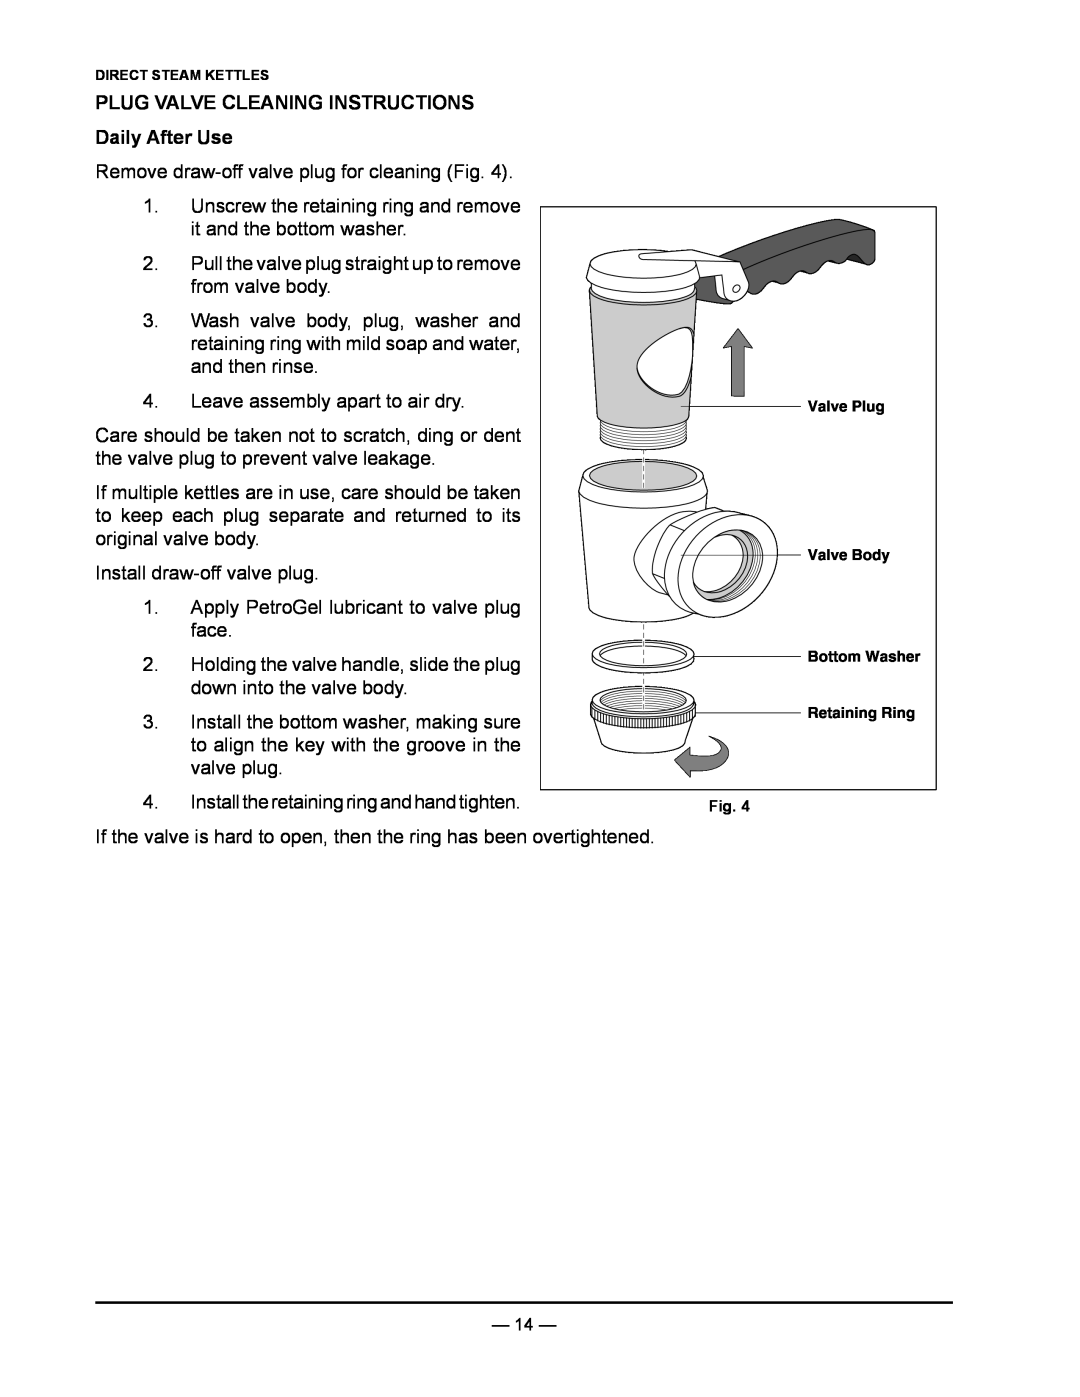 Vulcan-Hart K60DLT, K40DLT, K20DL PLUG VALVE CLEANING INSTRUCTIONS Daily After Use, Leave assembly apart to air dry 